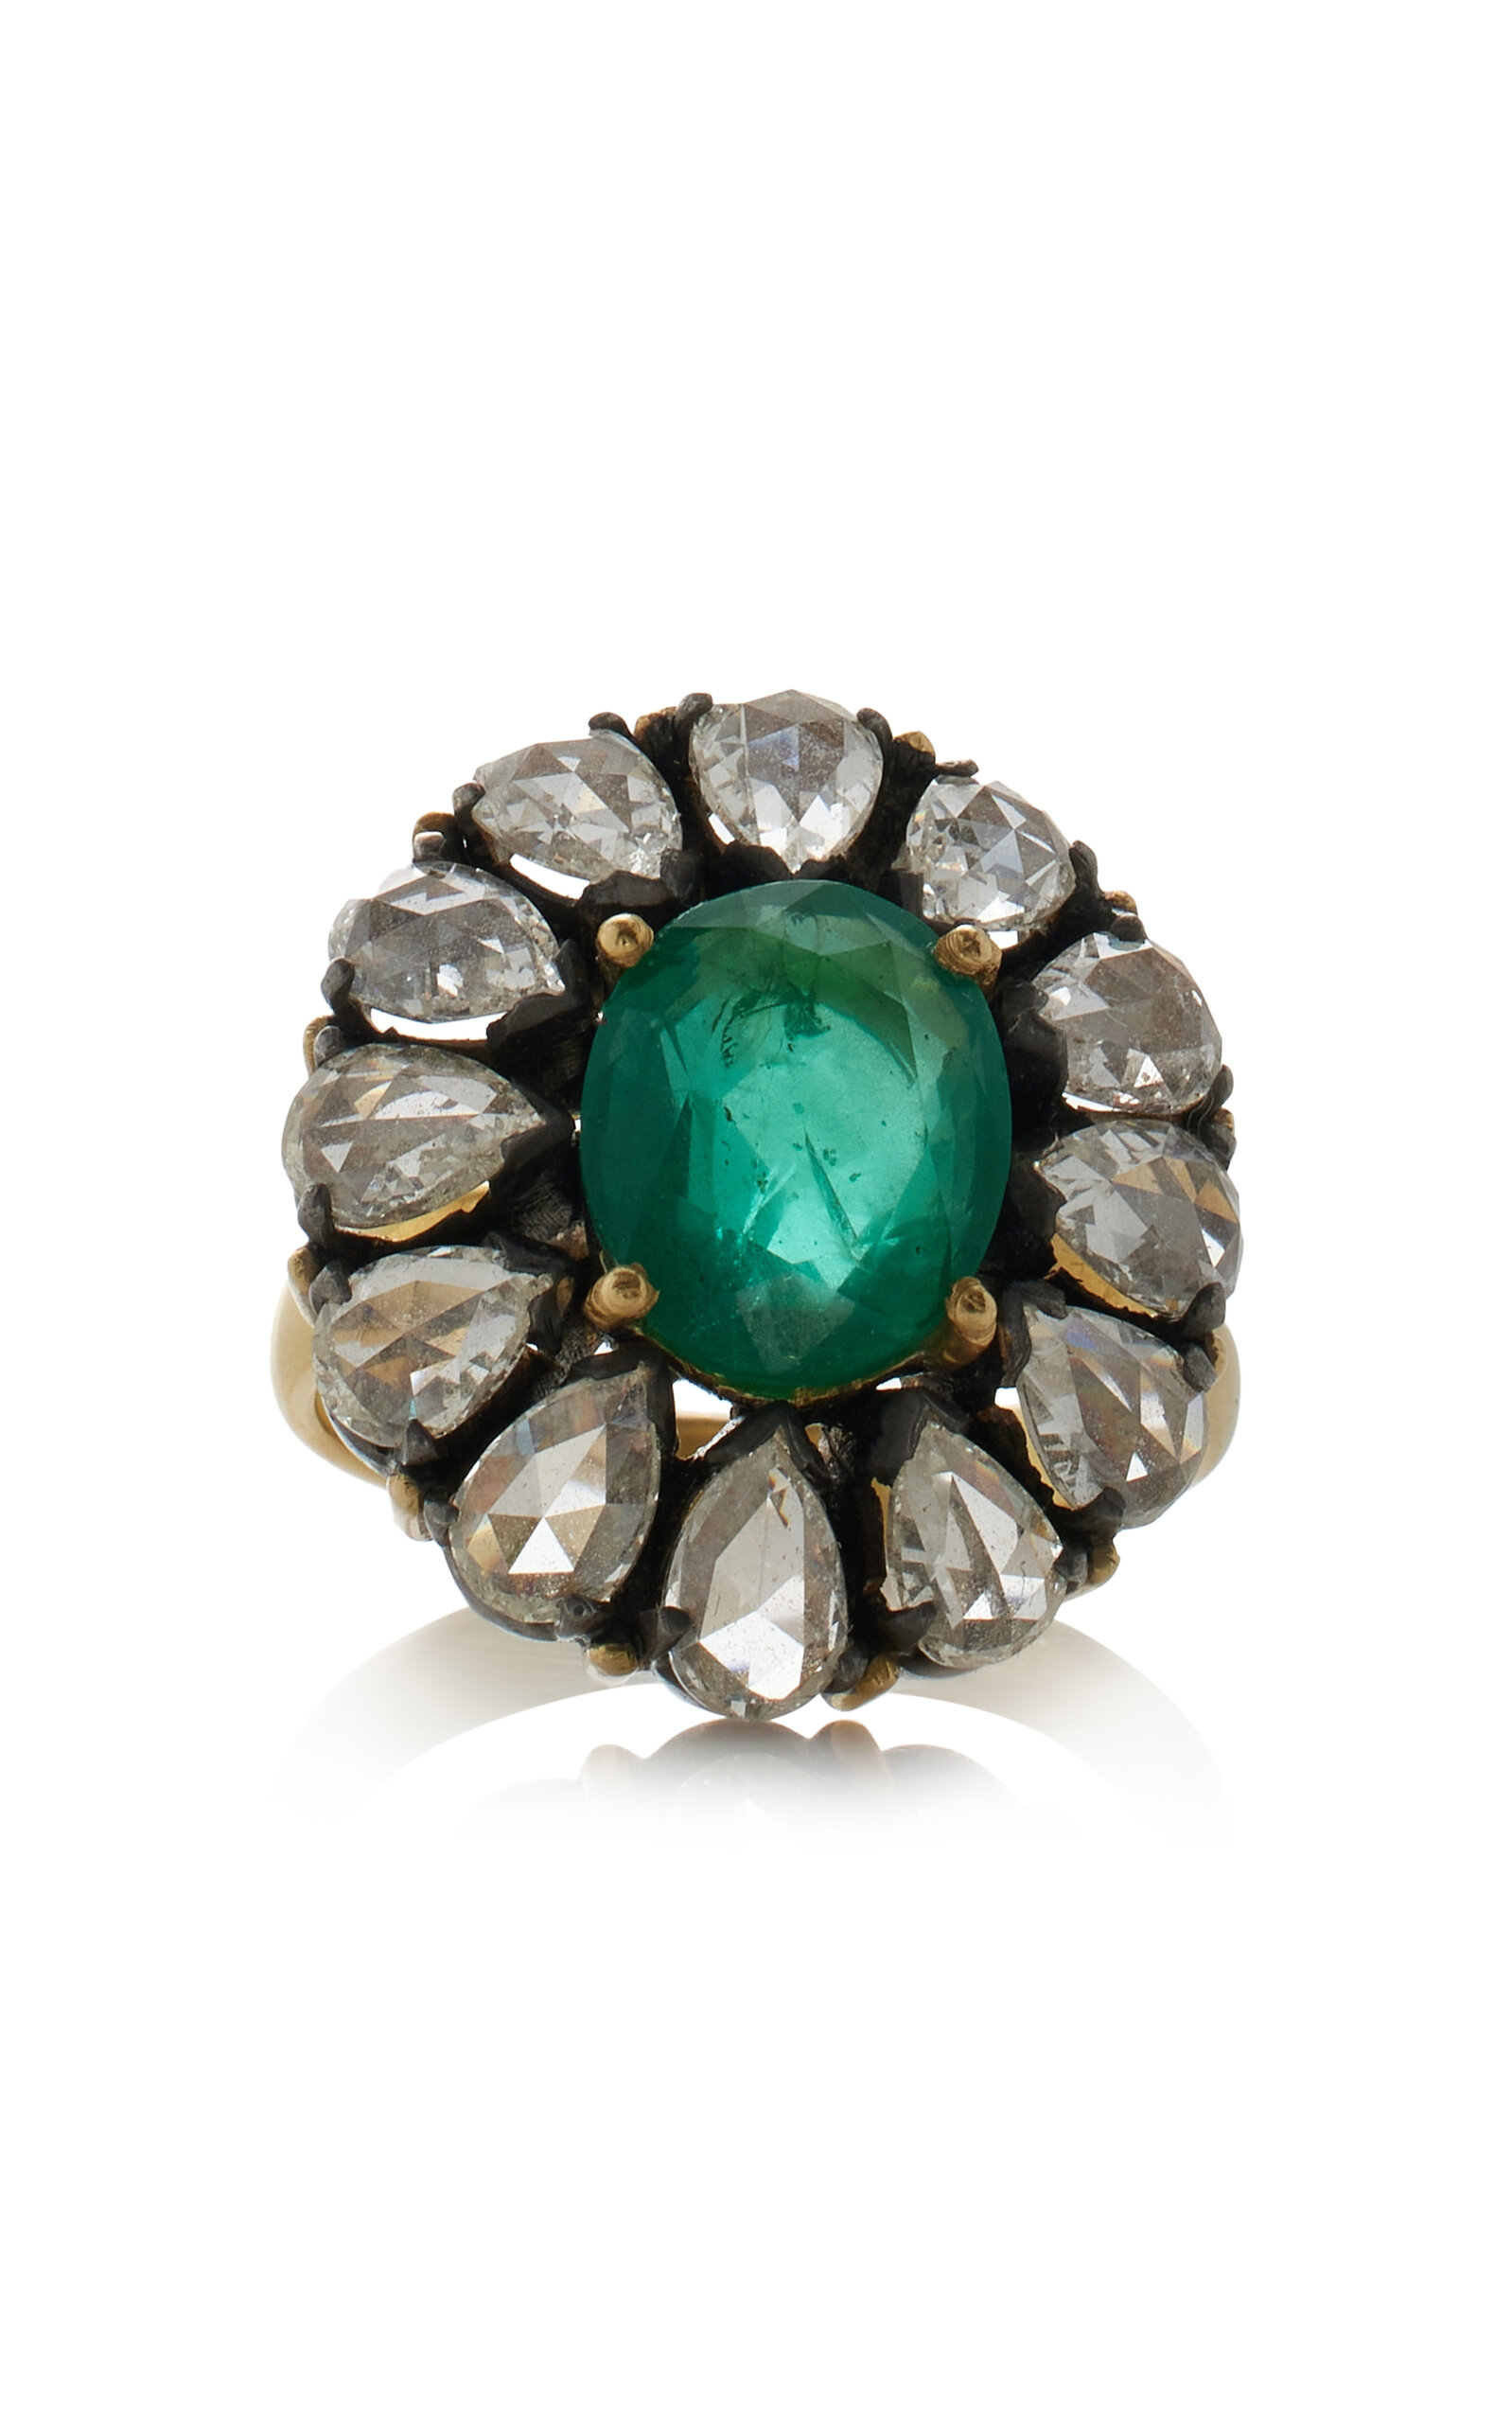 One-of-a-Kind Rajasthan Emerald; Diamond Ring